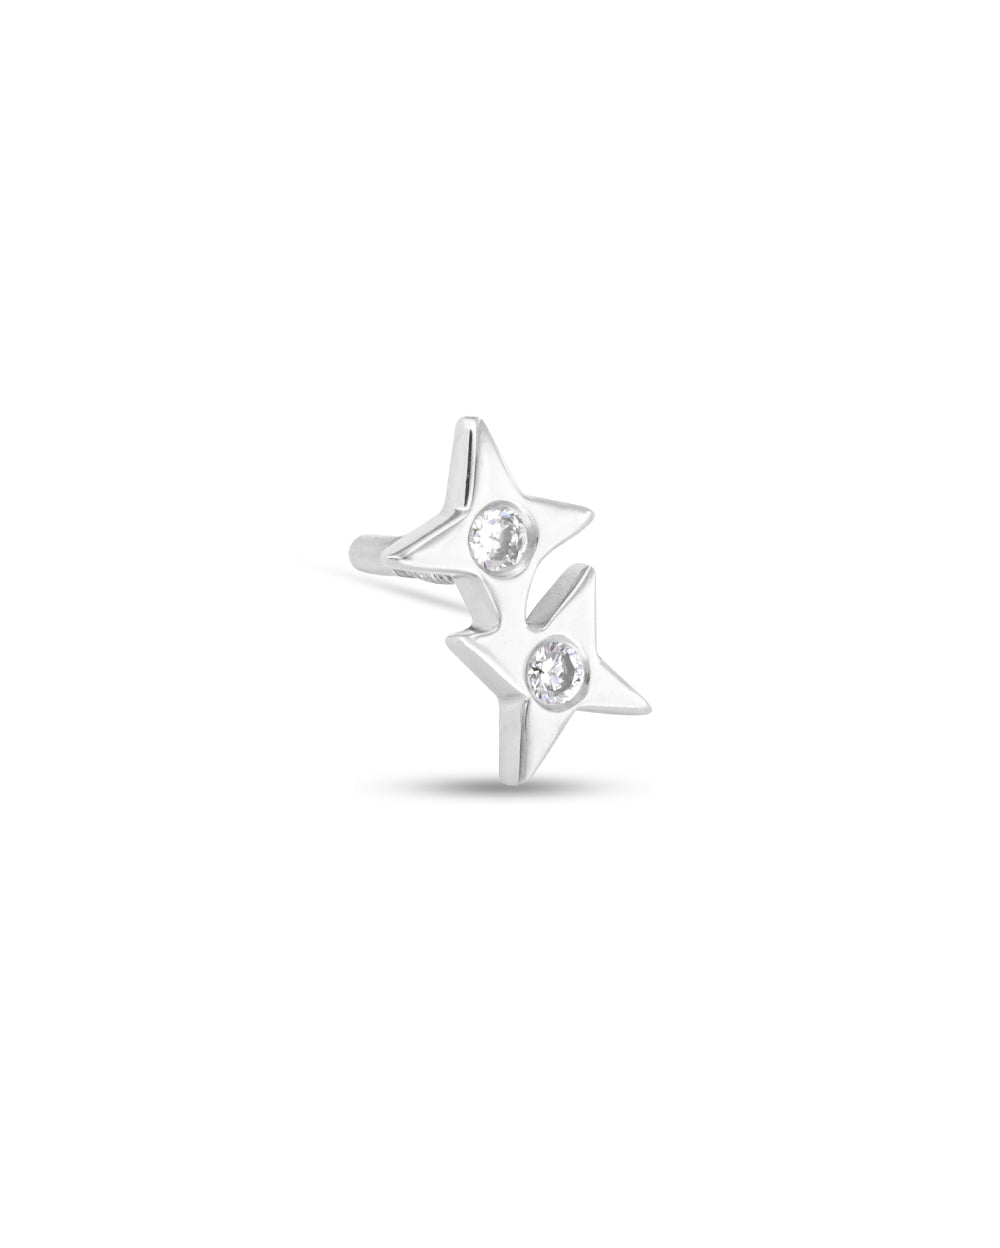 Covetear Starlight Duo Diamond Cartilage Earring#material_14k_White_Gold